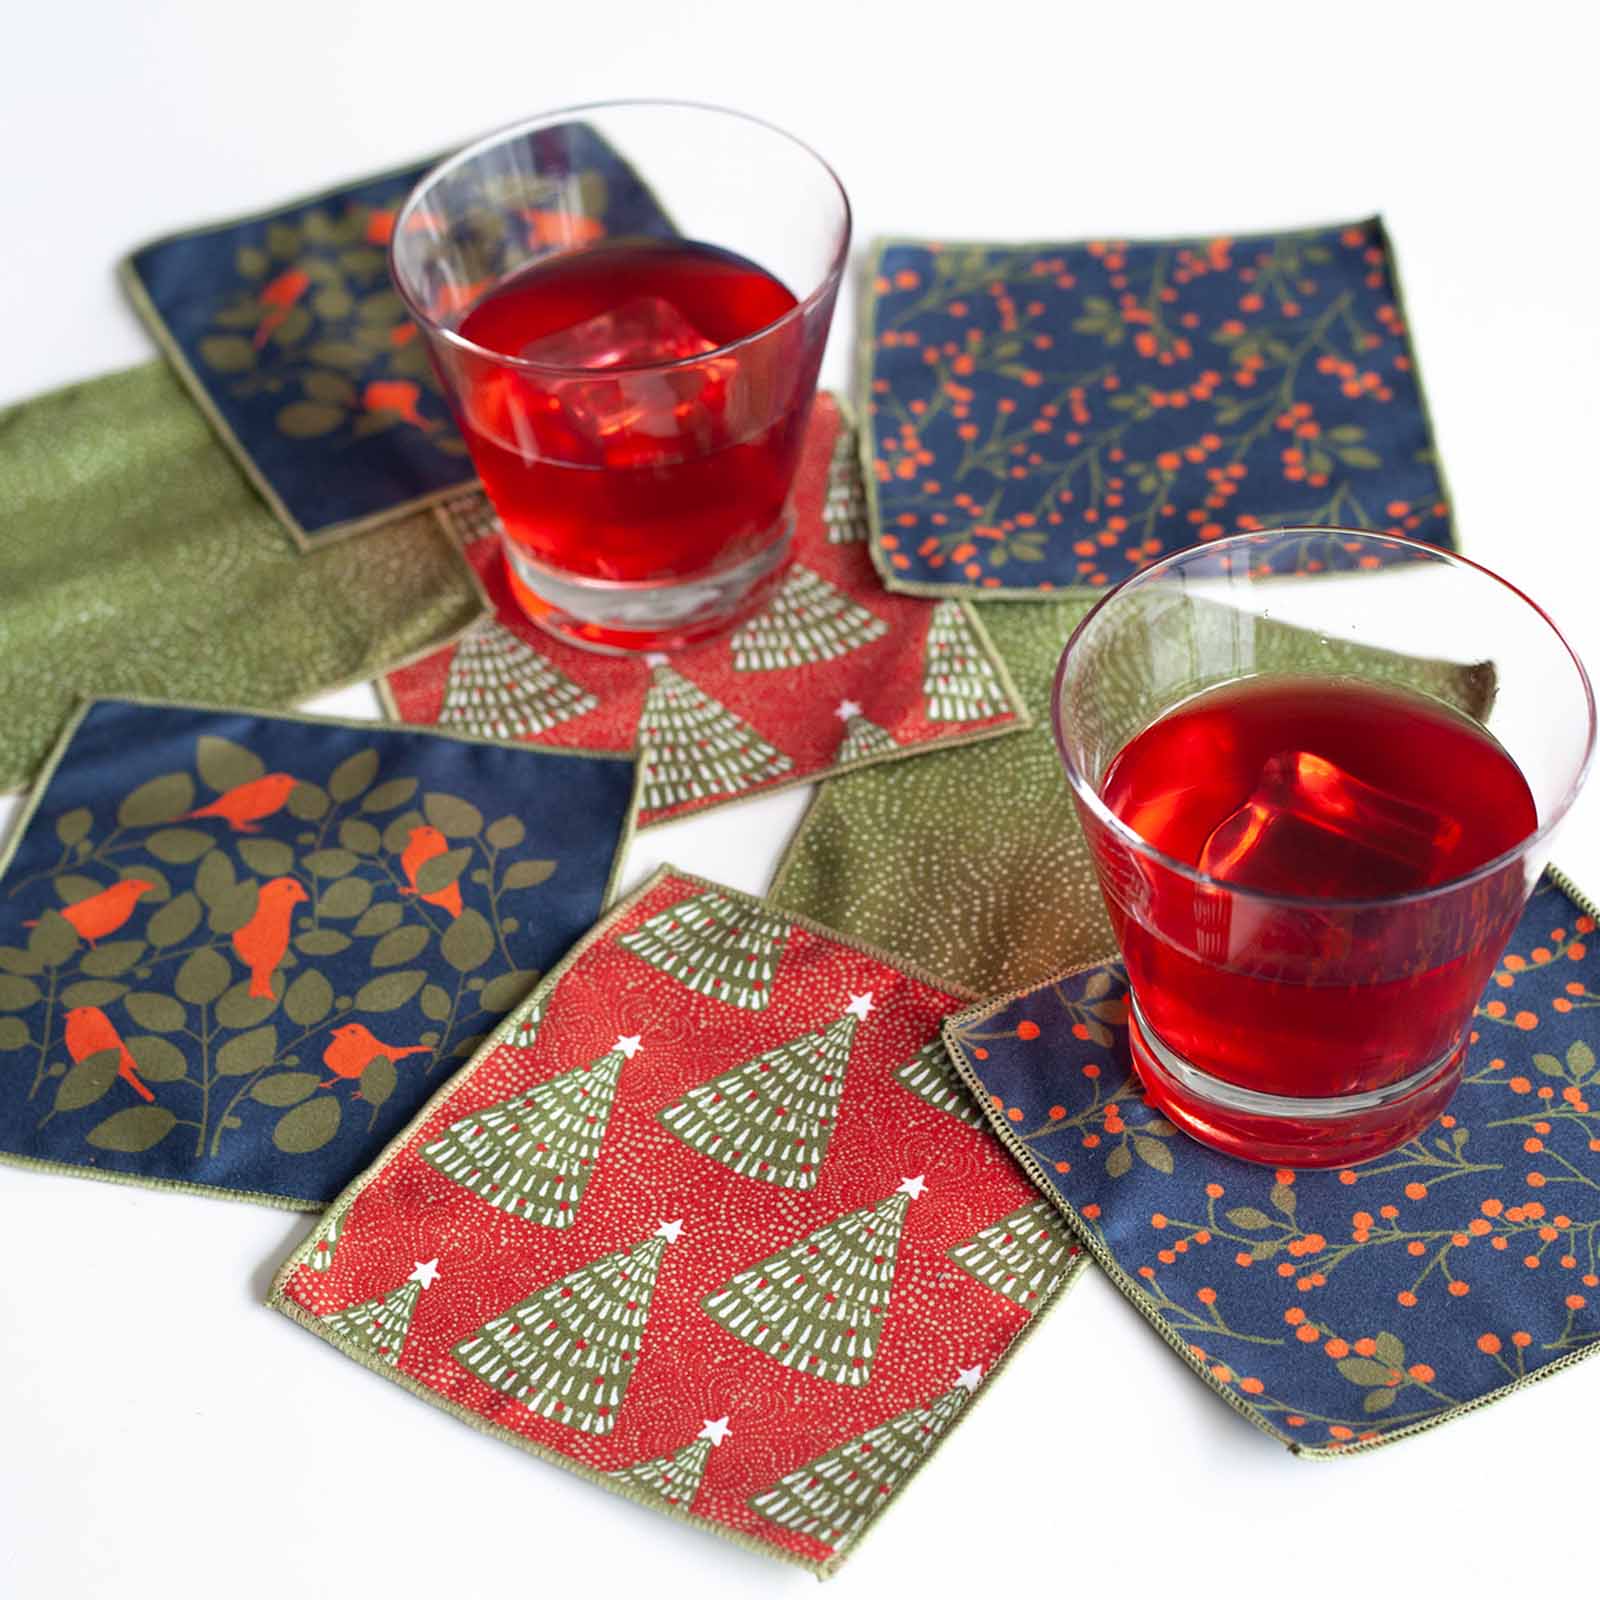 Holiday Cheer blu Kitchen Reusable Cocktail Napkins (Set of 8) Reusable Cocktail Napkin - rockflowerpaper